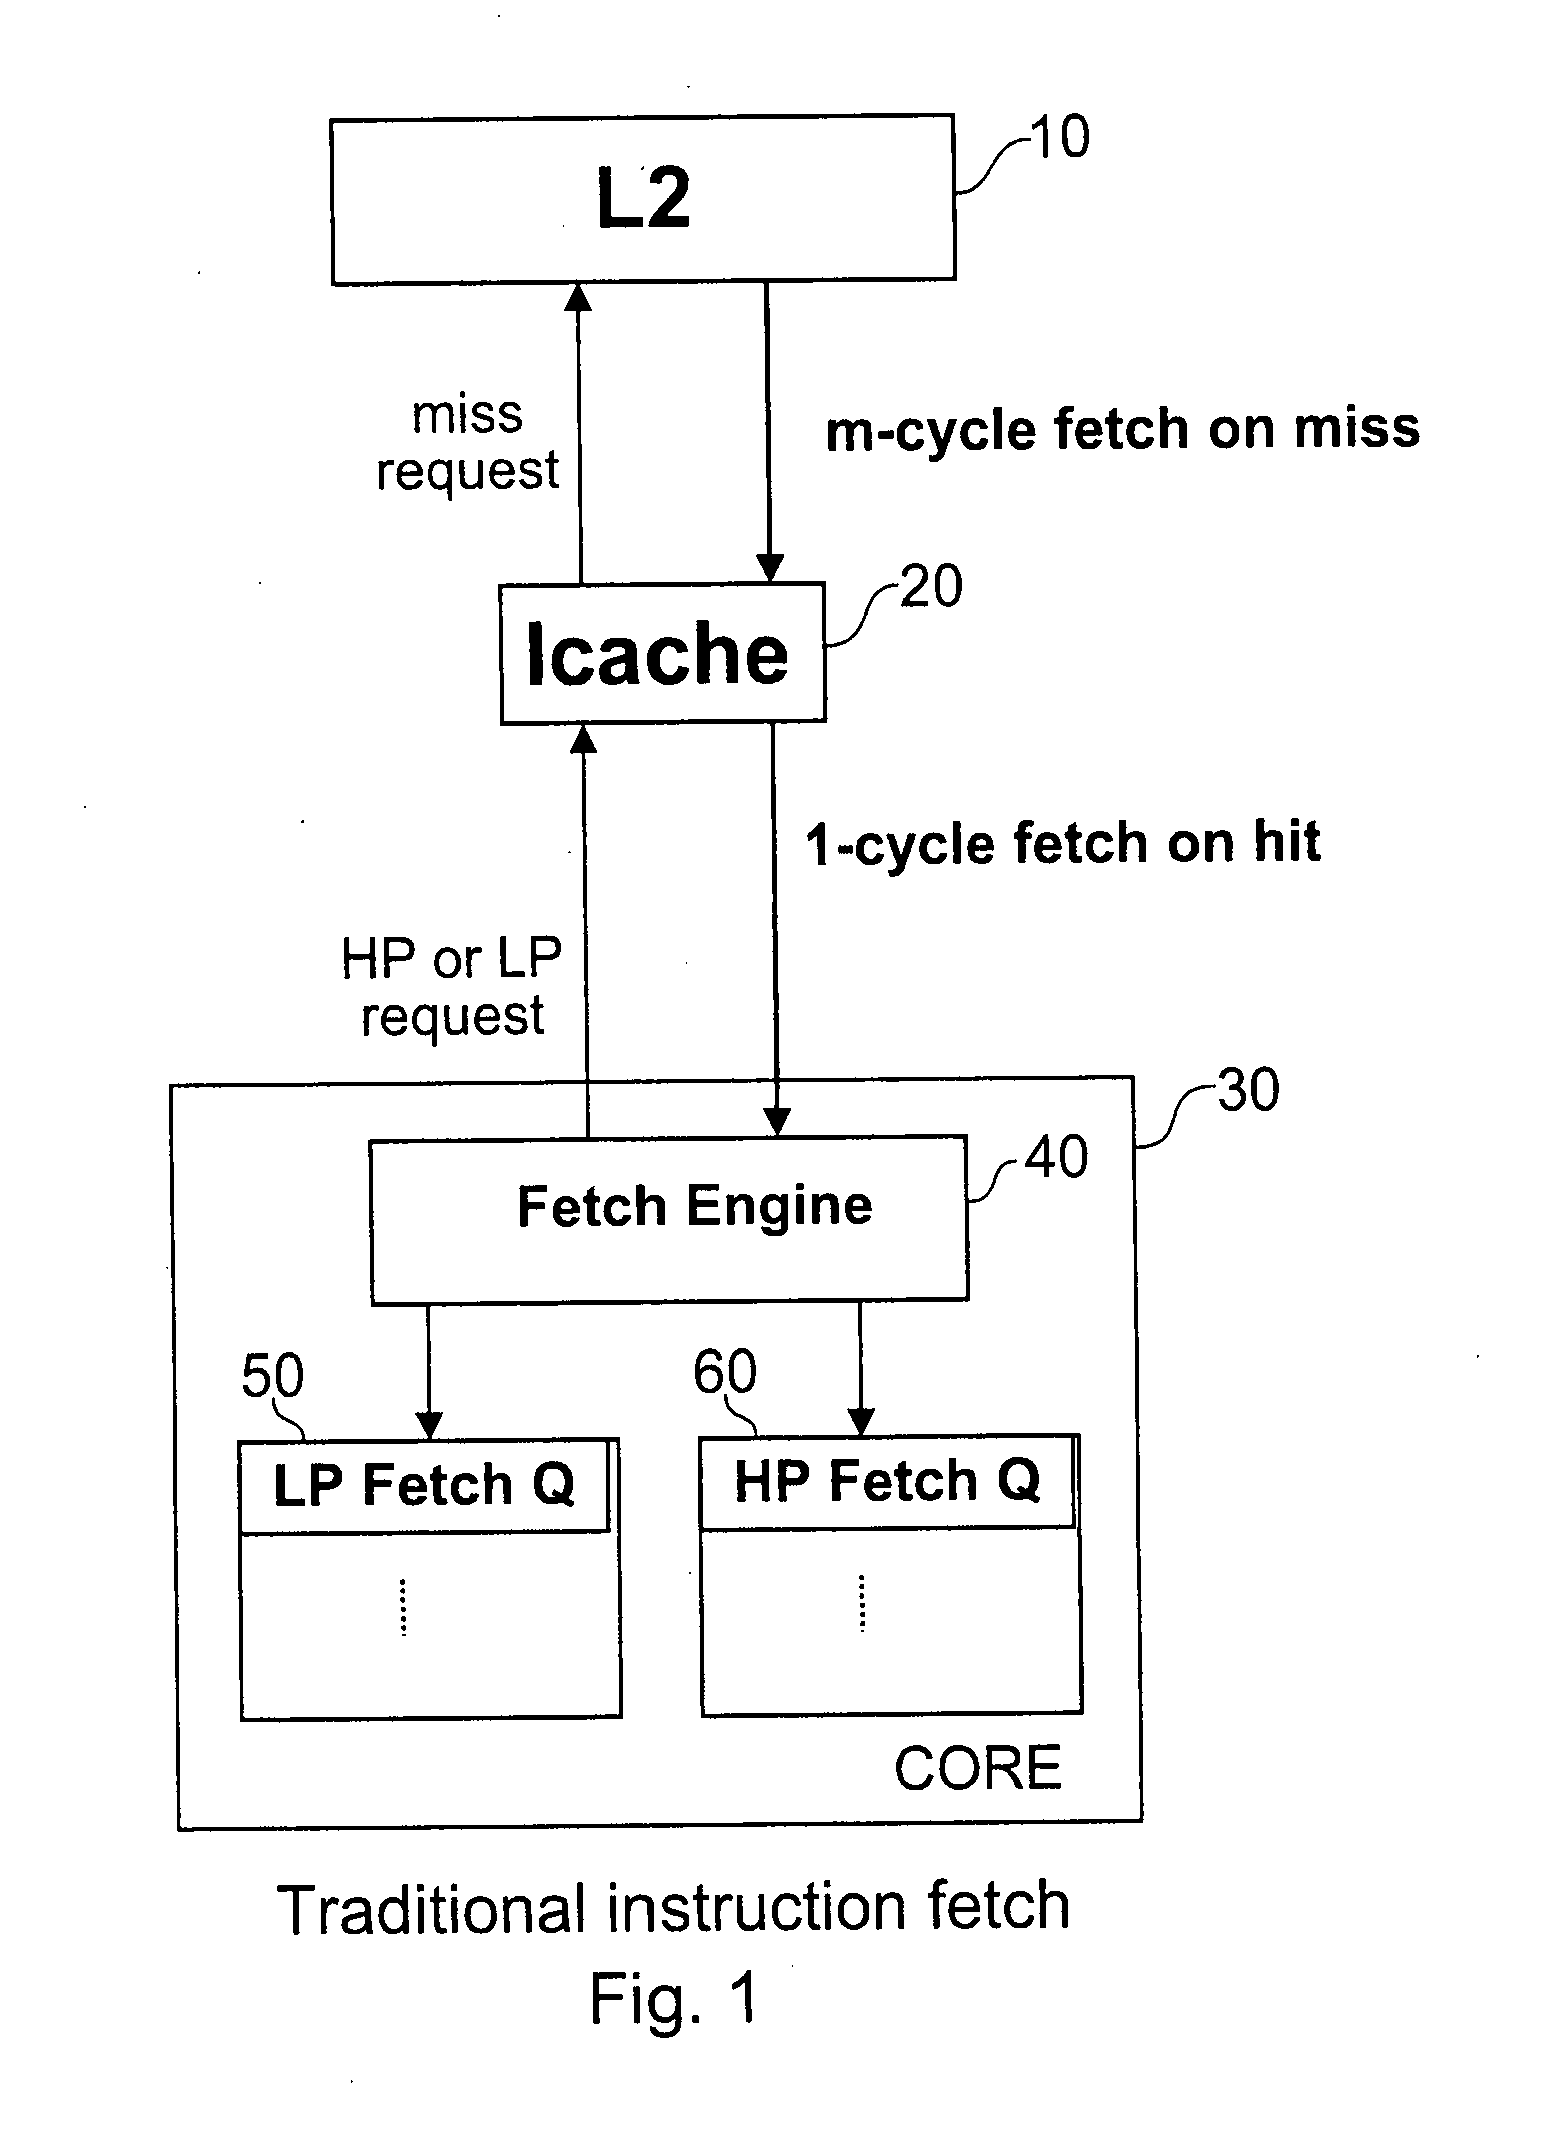 Multiple thread instruction fetch from different cache levels